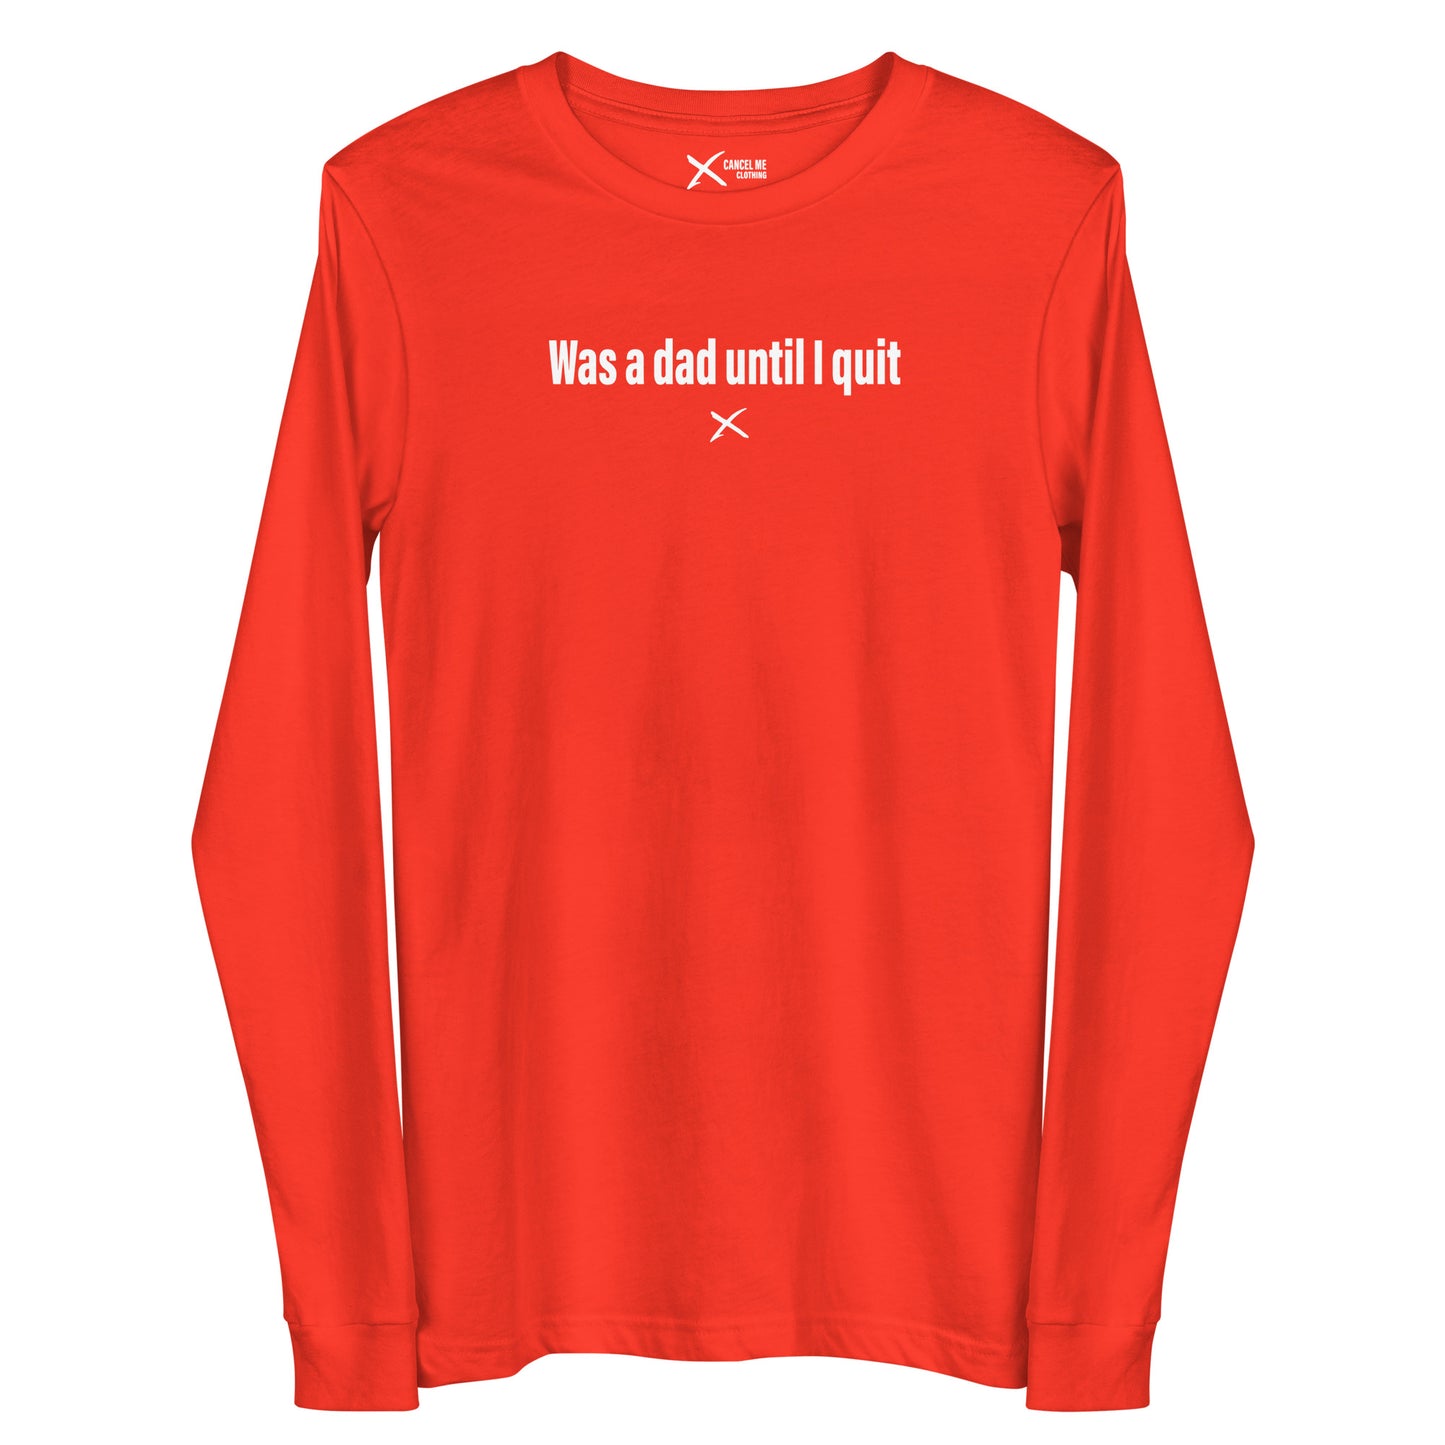 Was a dad until I quit - Longsleeve